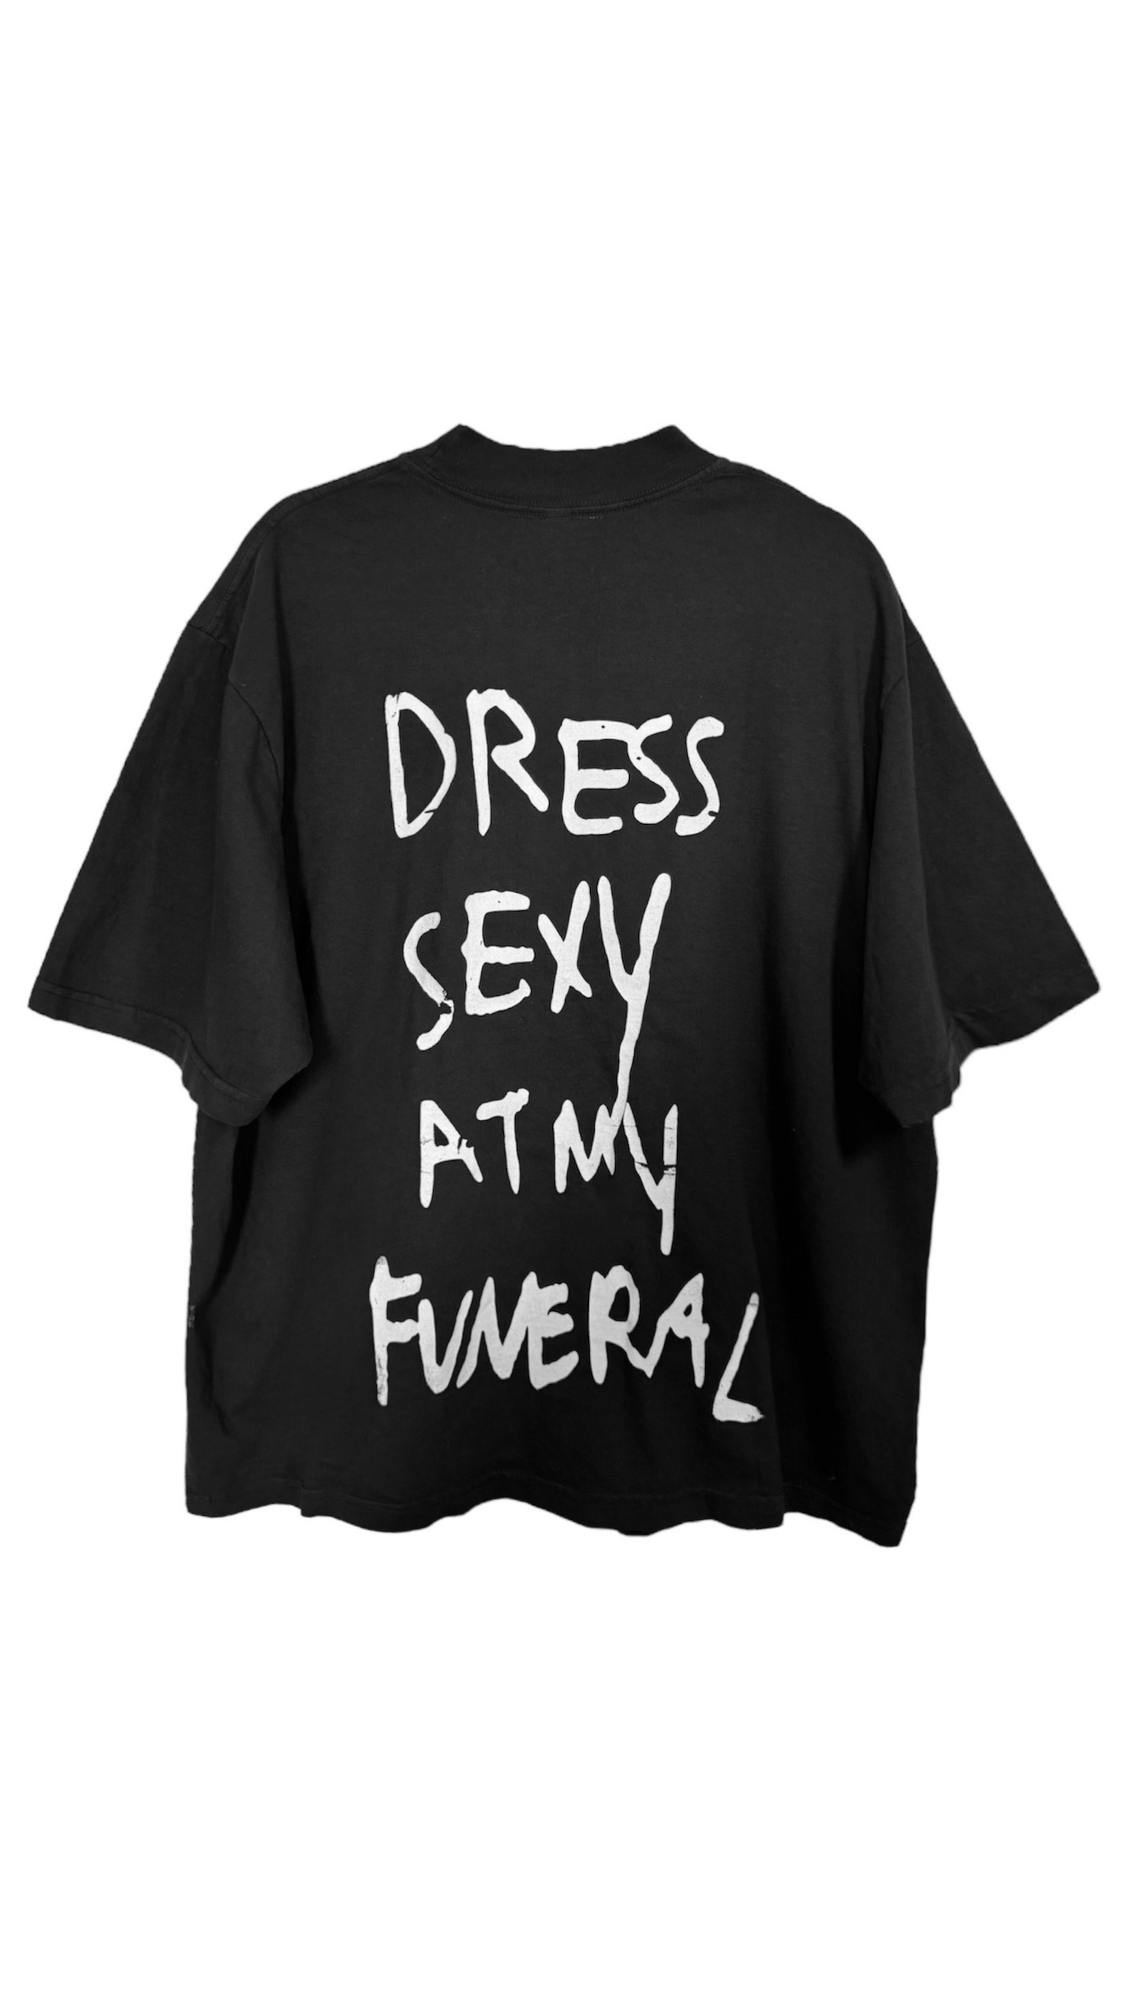 Dress Sexy at my Funeral Tee